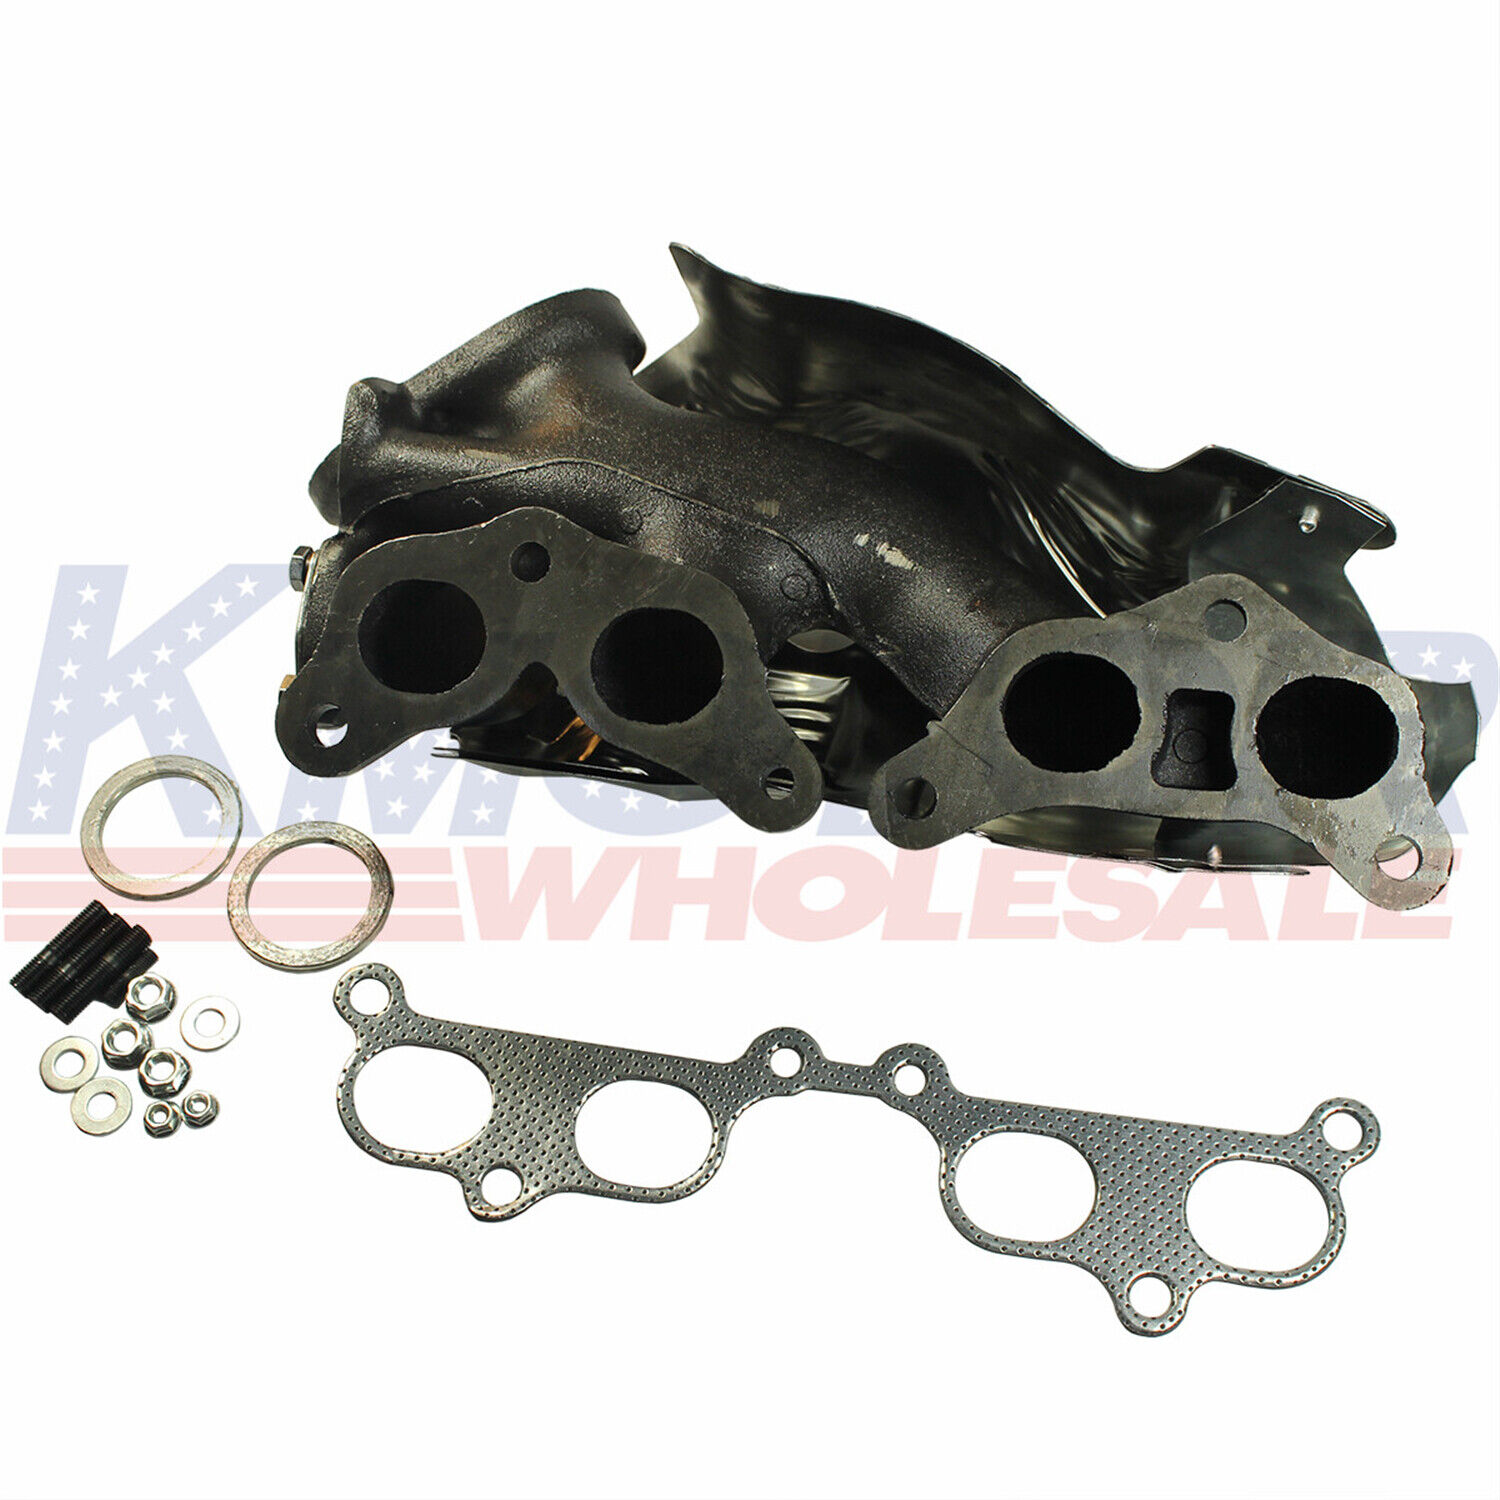 Exhaust Manifold & Gasket Kit Fit For Toyota Tacoma 4Runner T100 Truck 2.7L 2.4L